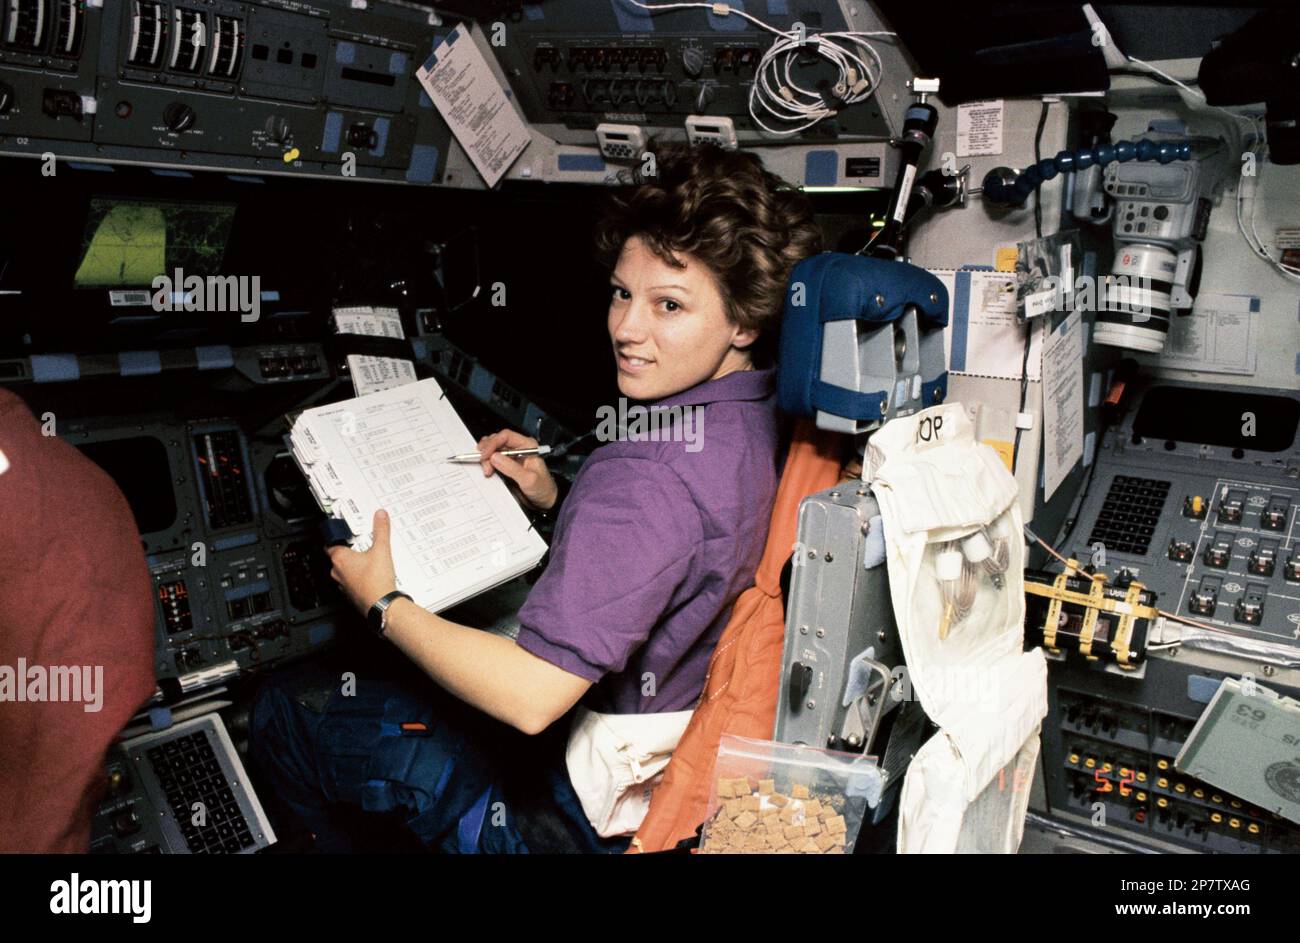 Usa. 8th Mar, 2023. FILE: Former astronaut Eileen Collins sits at the pilot's station aboard space shuttle Discovery during a hotfiring procedure on Feb. 2, 1995. Selected by NASA in January 1990, Collins became the first woman pilot of a Space Shuttle and the first woman to command a shuttle mission. Over four mission, STS-63 Discovery, STS-84 Atlantis, STS-93 Columbia, and STS-114 Discovery, she logged over 537 hours in space. Highlights of her missions include the Chandra X-Ray Observatory deployment, scientific experiments, and evaluation of new flight safety procedures. (Credit Image: © Stock Photo